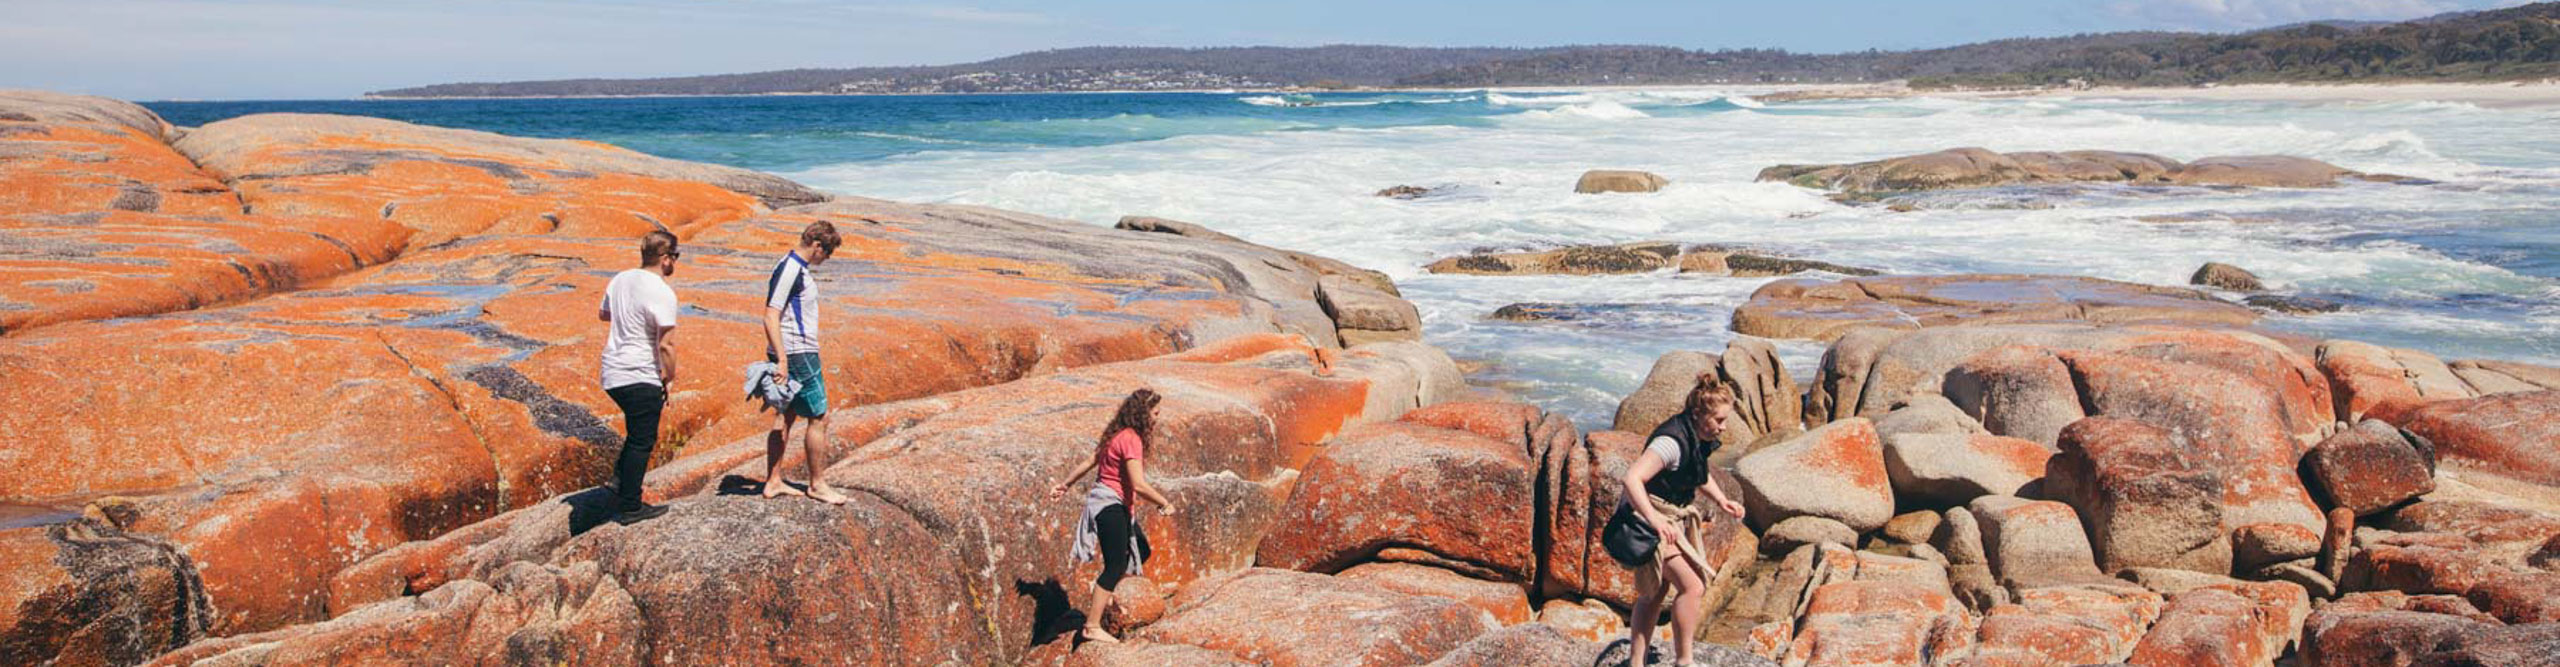 People walking on the red rocks of the bay of fires in Tasmania, Australia 